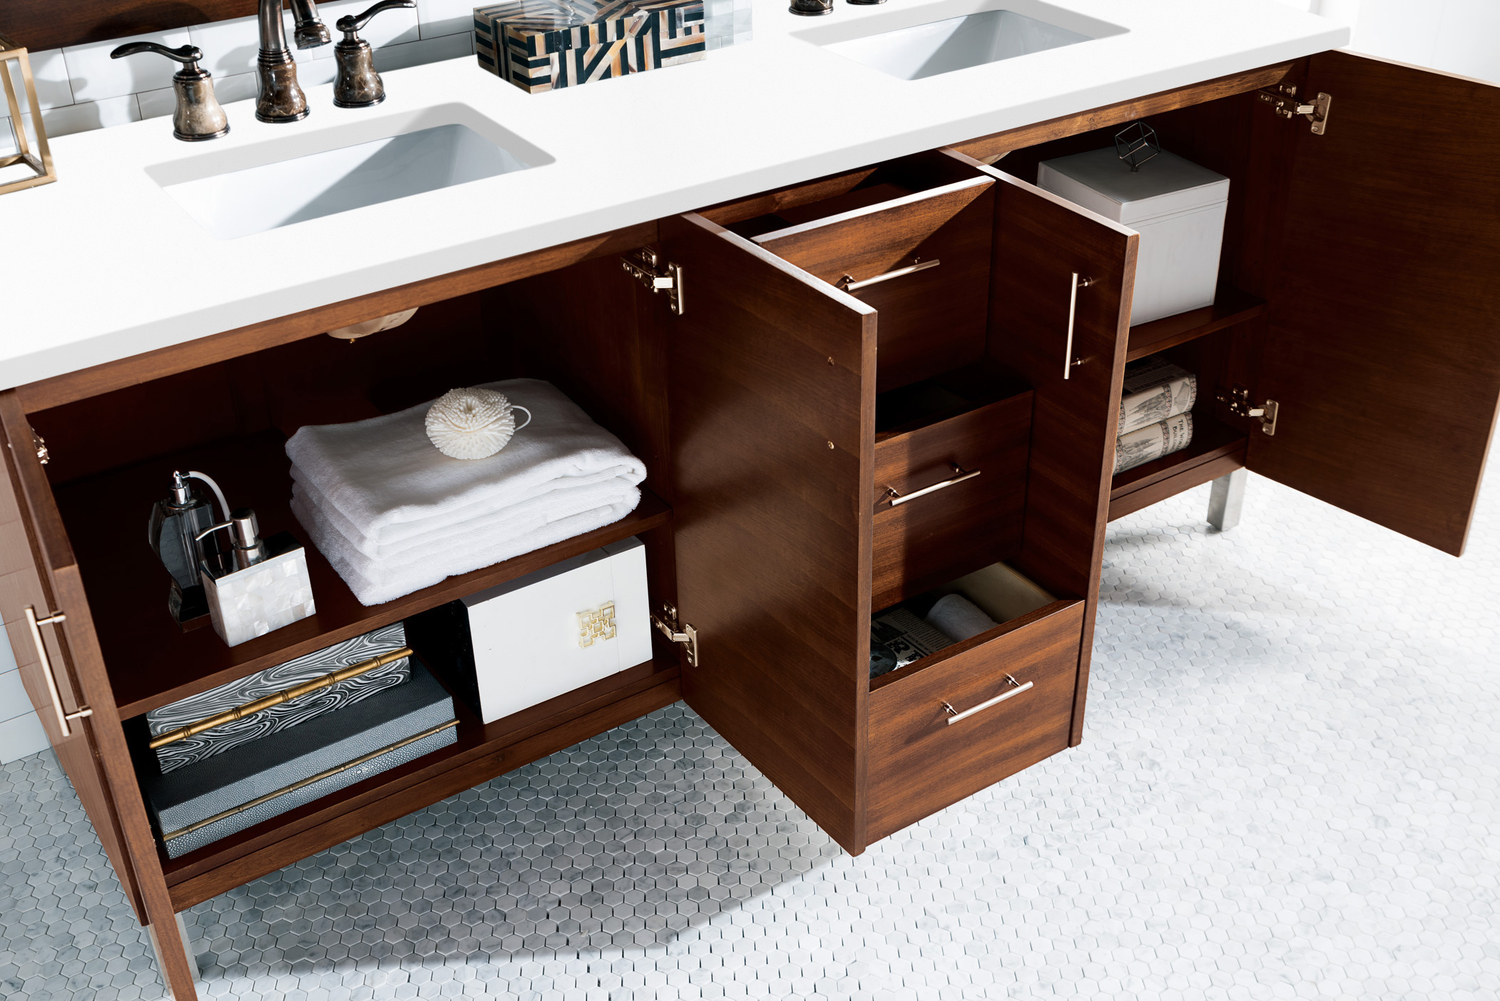 two vanities with cabinet in between James Martin Vanity American Walnut Contemporary/Modern, Transitional